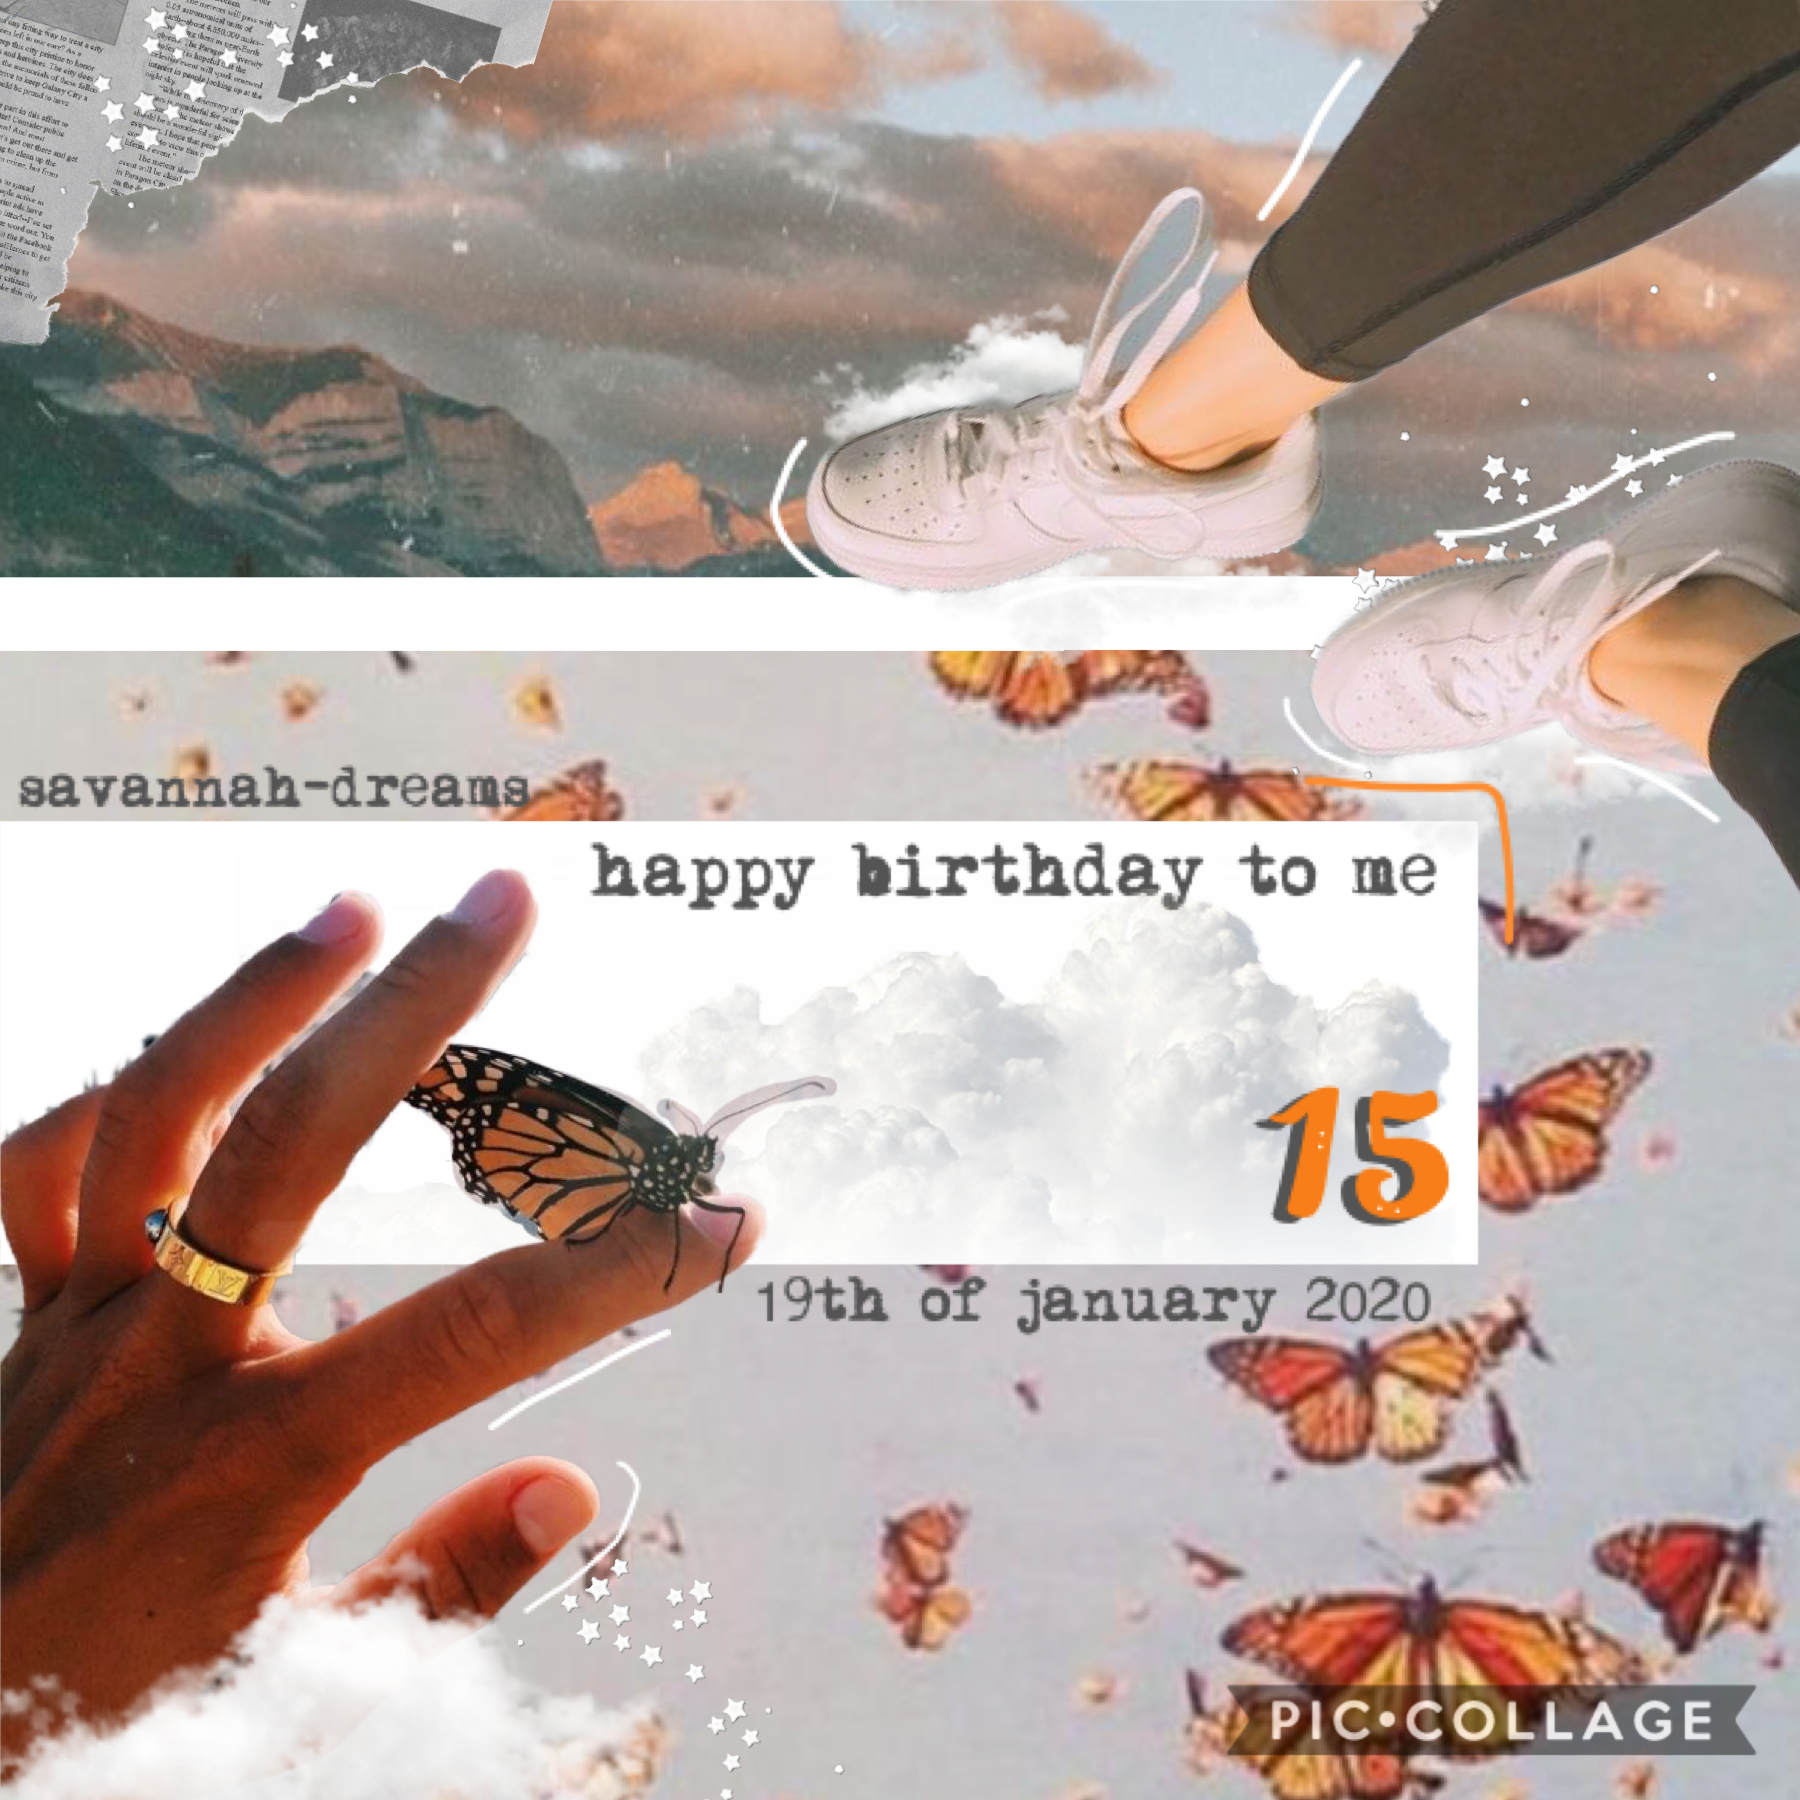 eeeee 🦩🧚🏼‍♀️🍃 it's my freaking birthday!!!!! 🍒🍒 (okay well not when I'm posting this but it will be tomorrow!) 🌈 gosh 15 is so old... 🦖🦖 style totally stolen from nae (@_moonlightnasa_) 🦙